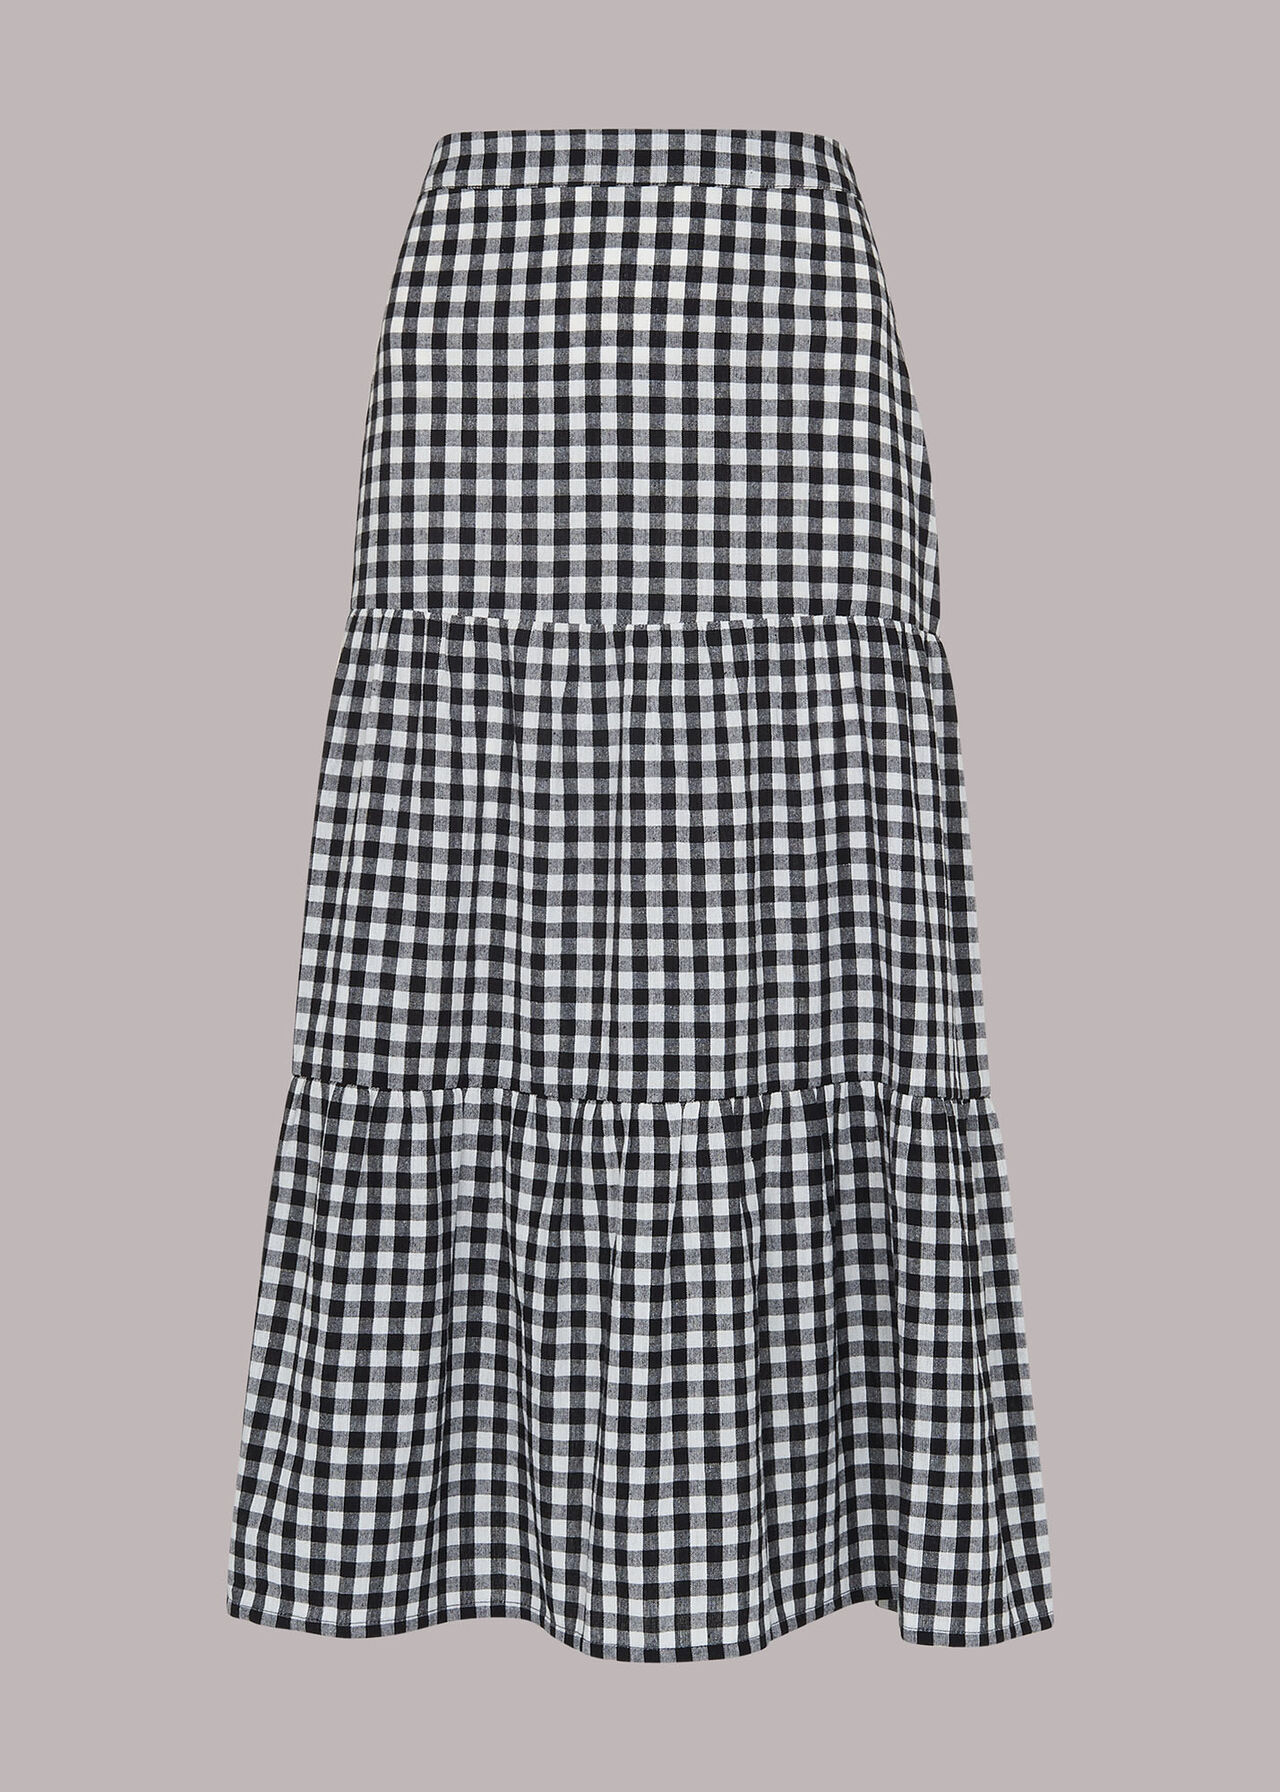 Tiered Gingham Skirt